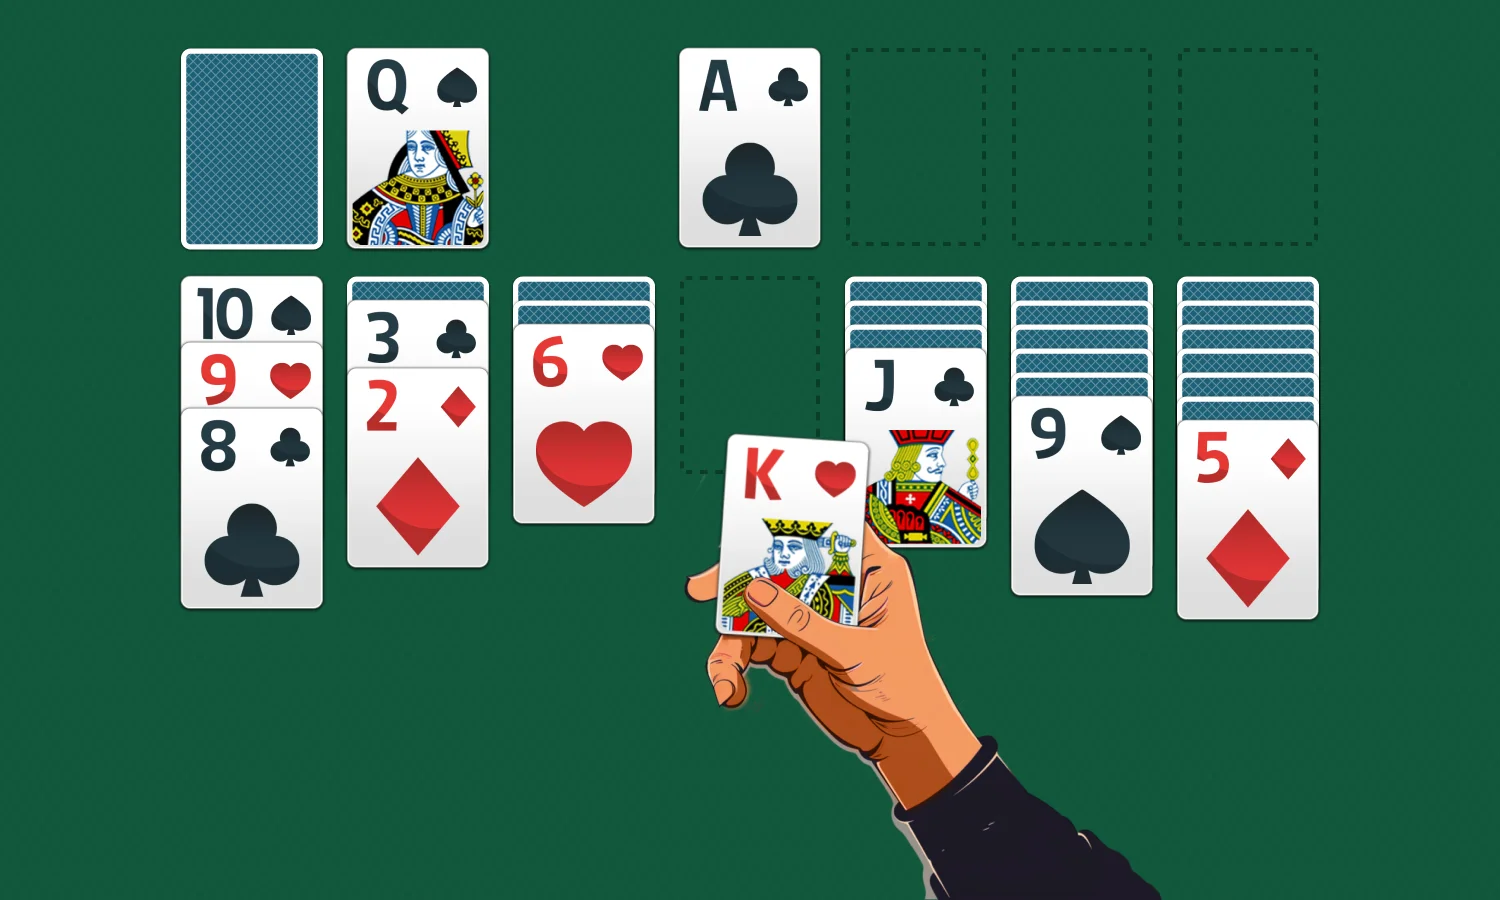 What Is a Good Solitaire Score?